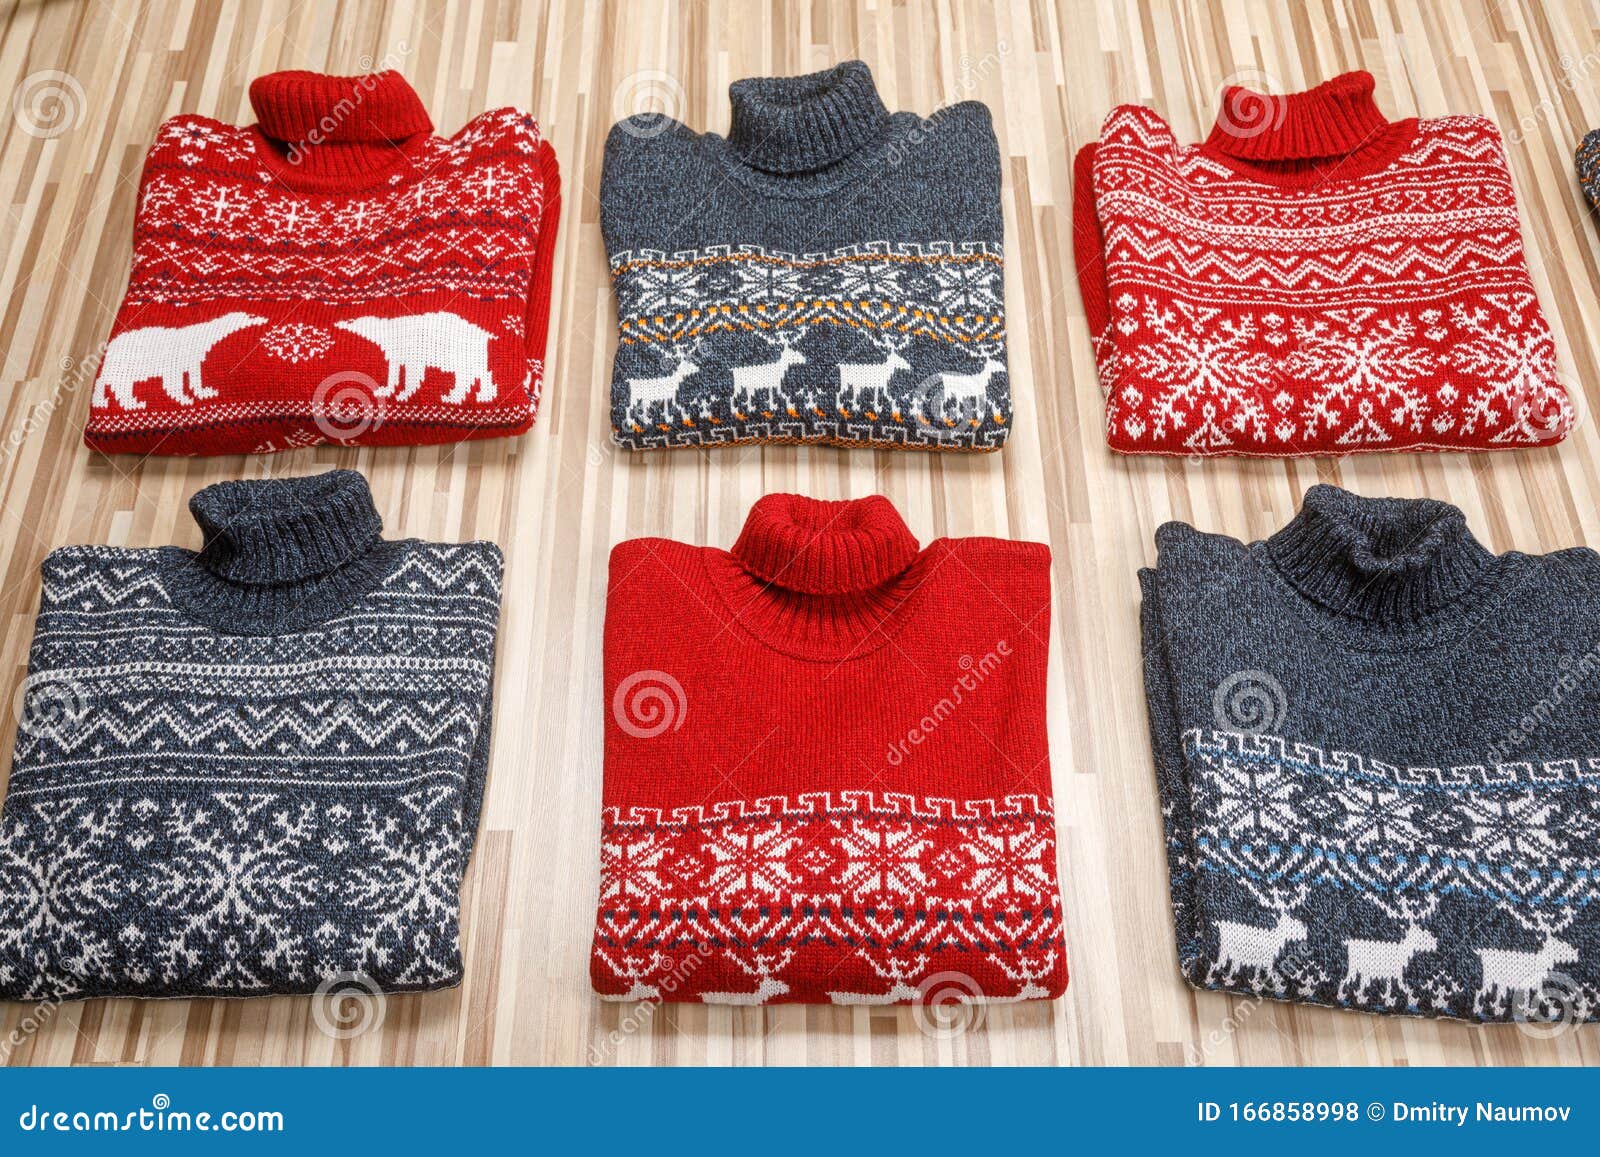 Collection of Knitted Christmas Turtleneck Sweaters Folded on Wooden ...